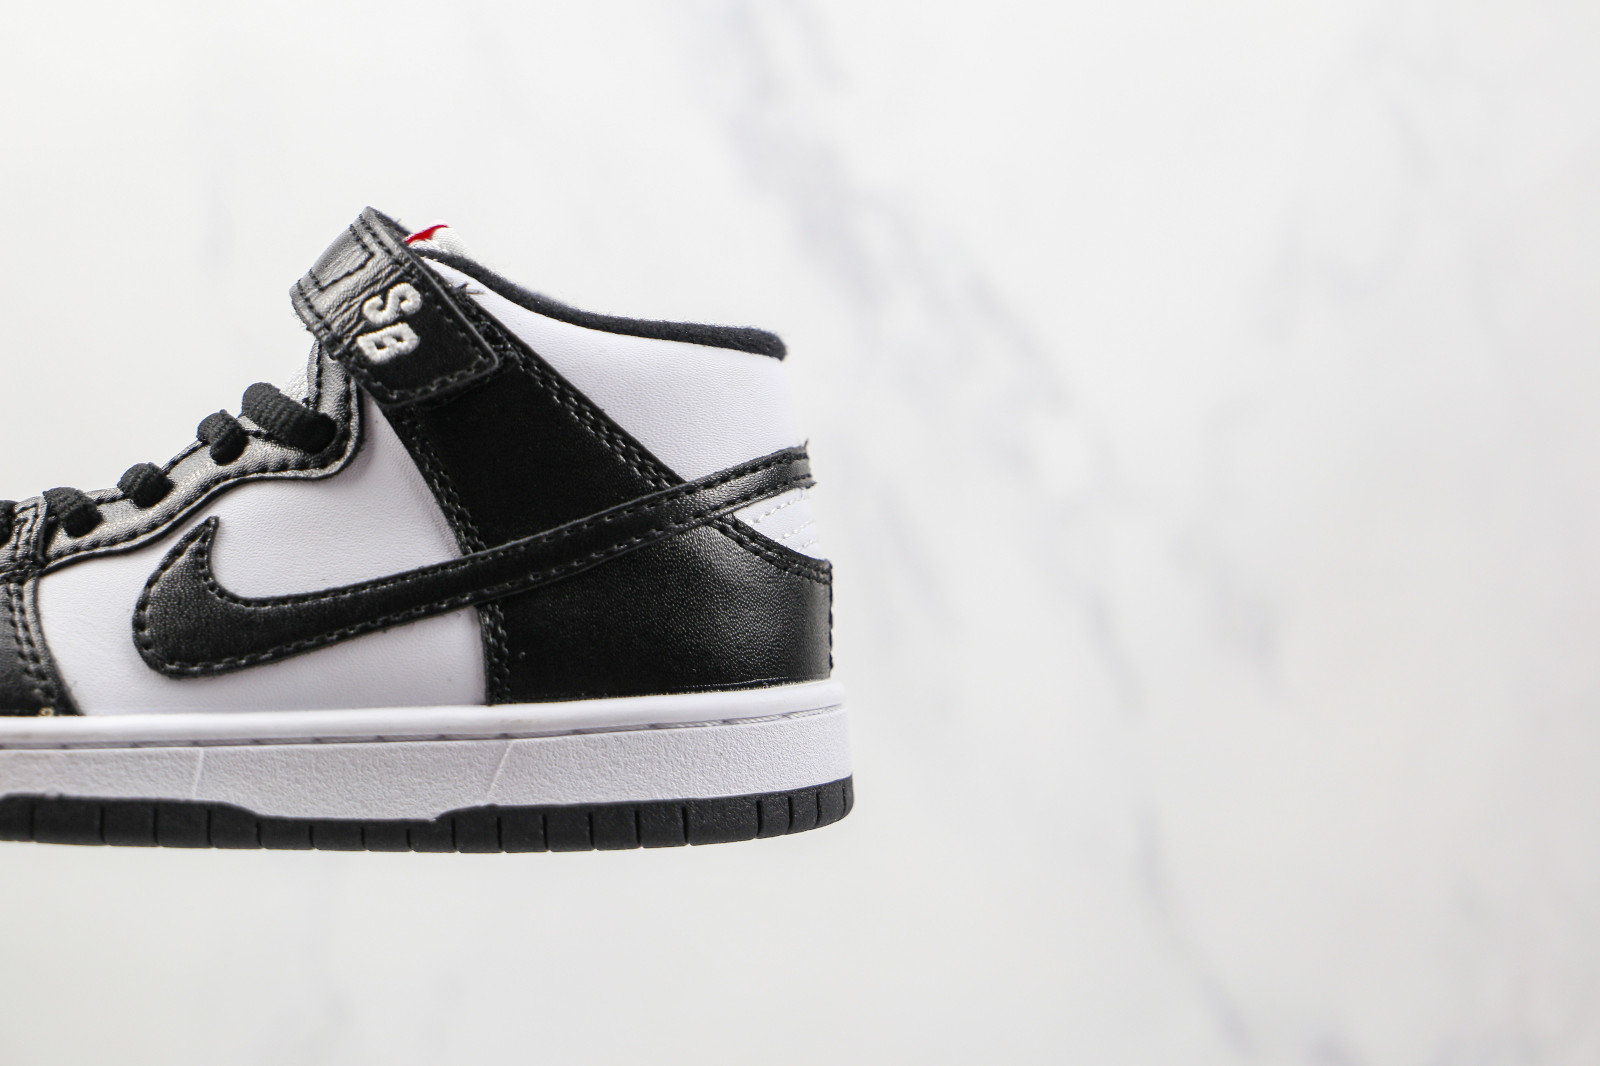 105 Nike SB Dunk Mid ISO White Black Kids Shoes CD6754 - NwfpsShops grey nike shoes with black check girls